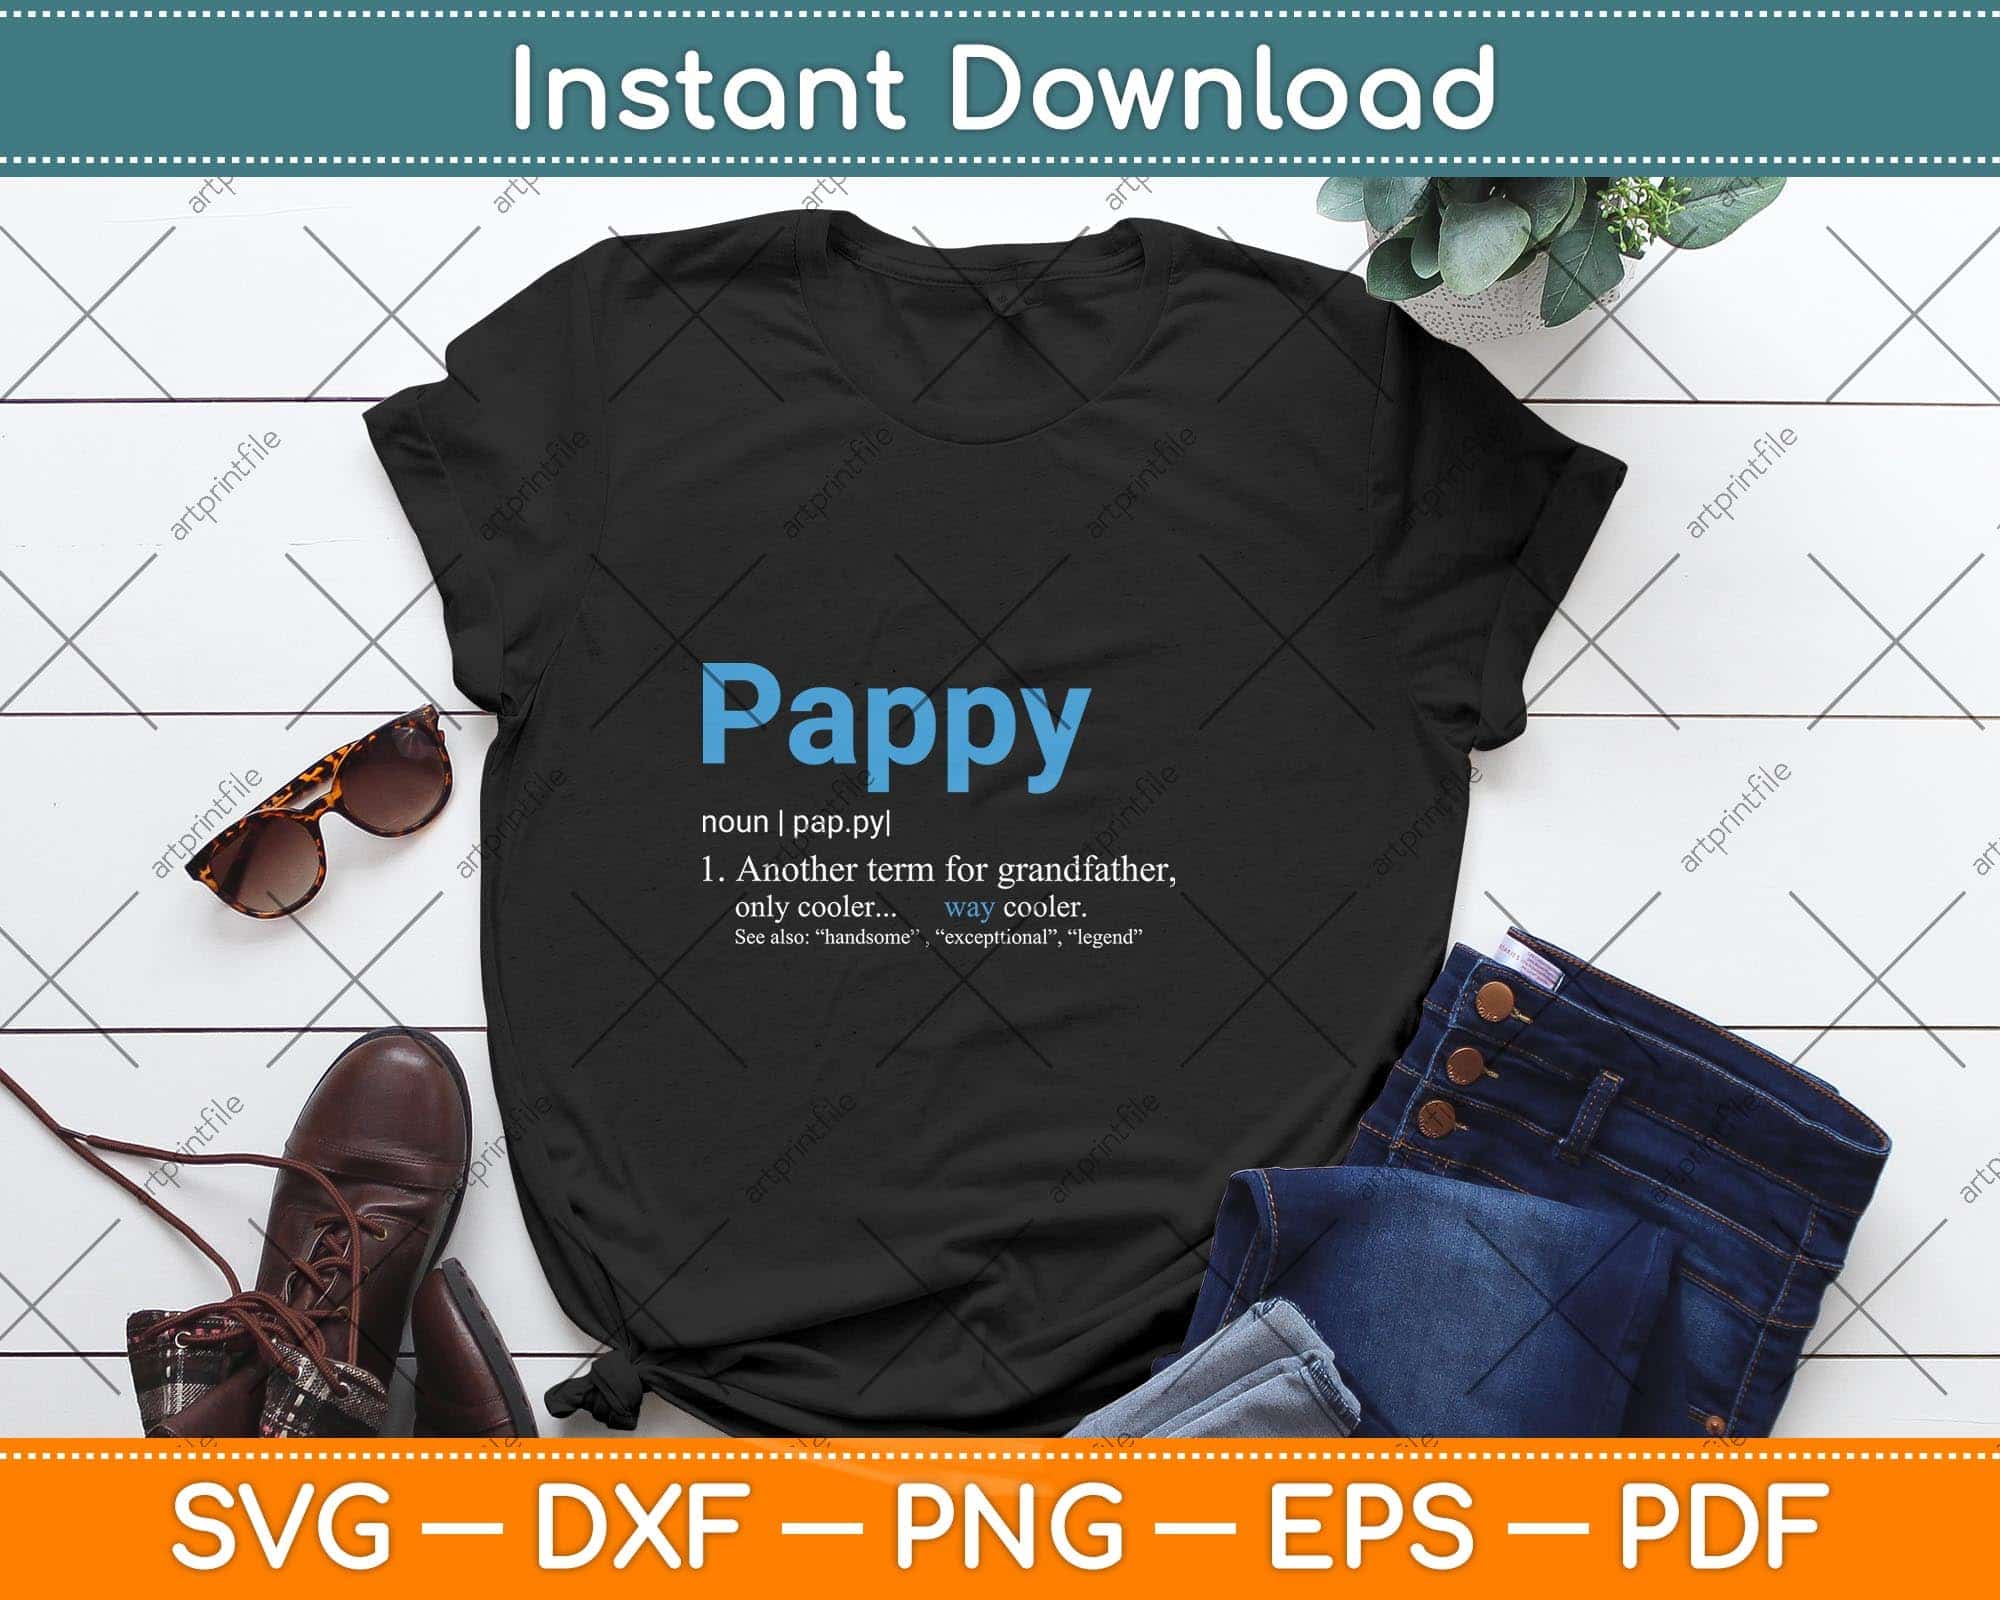 Best Gifts For Grandad| Present Ideas For Grandads - Funky Gifts NZ